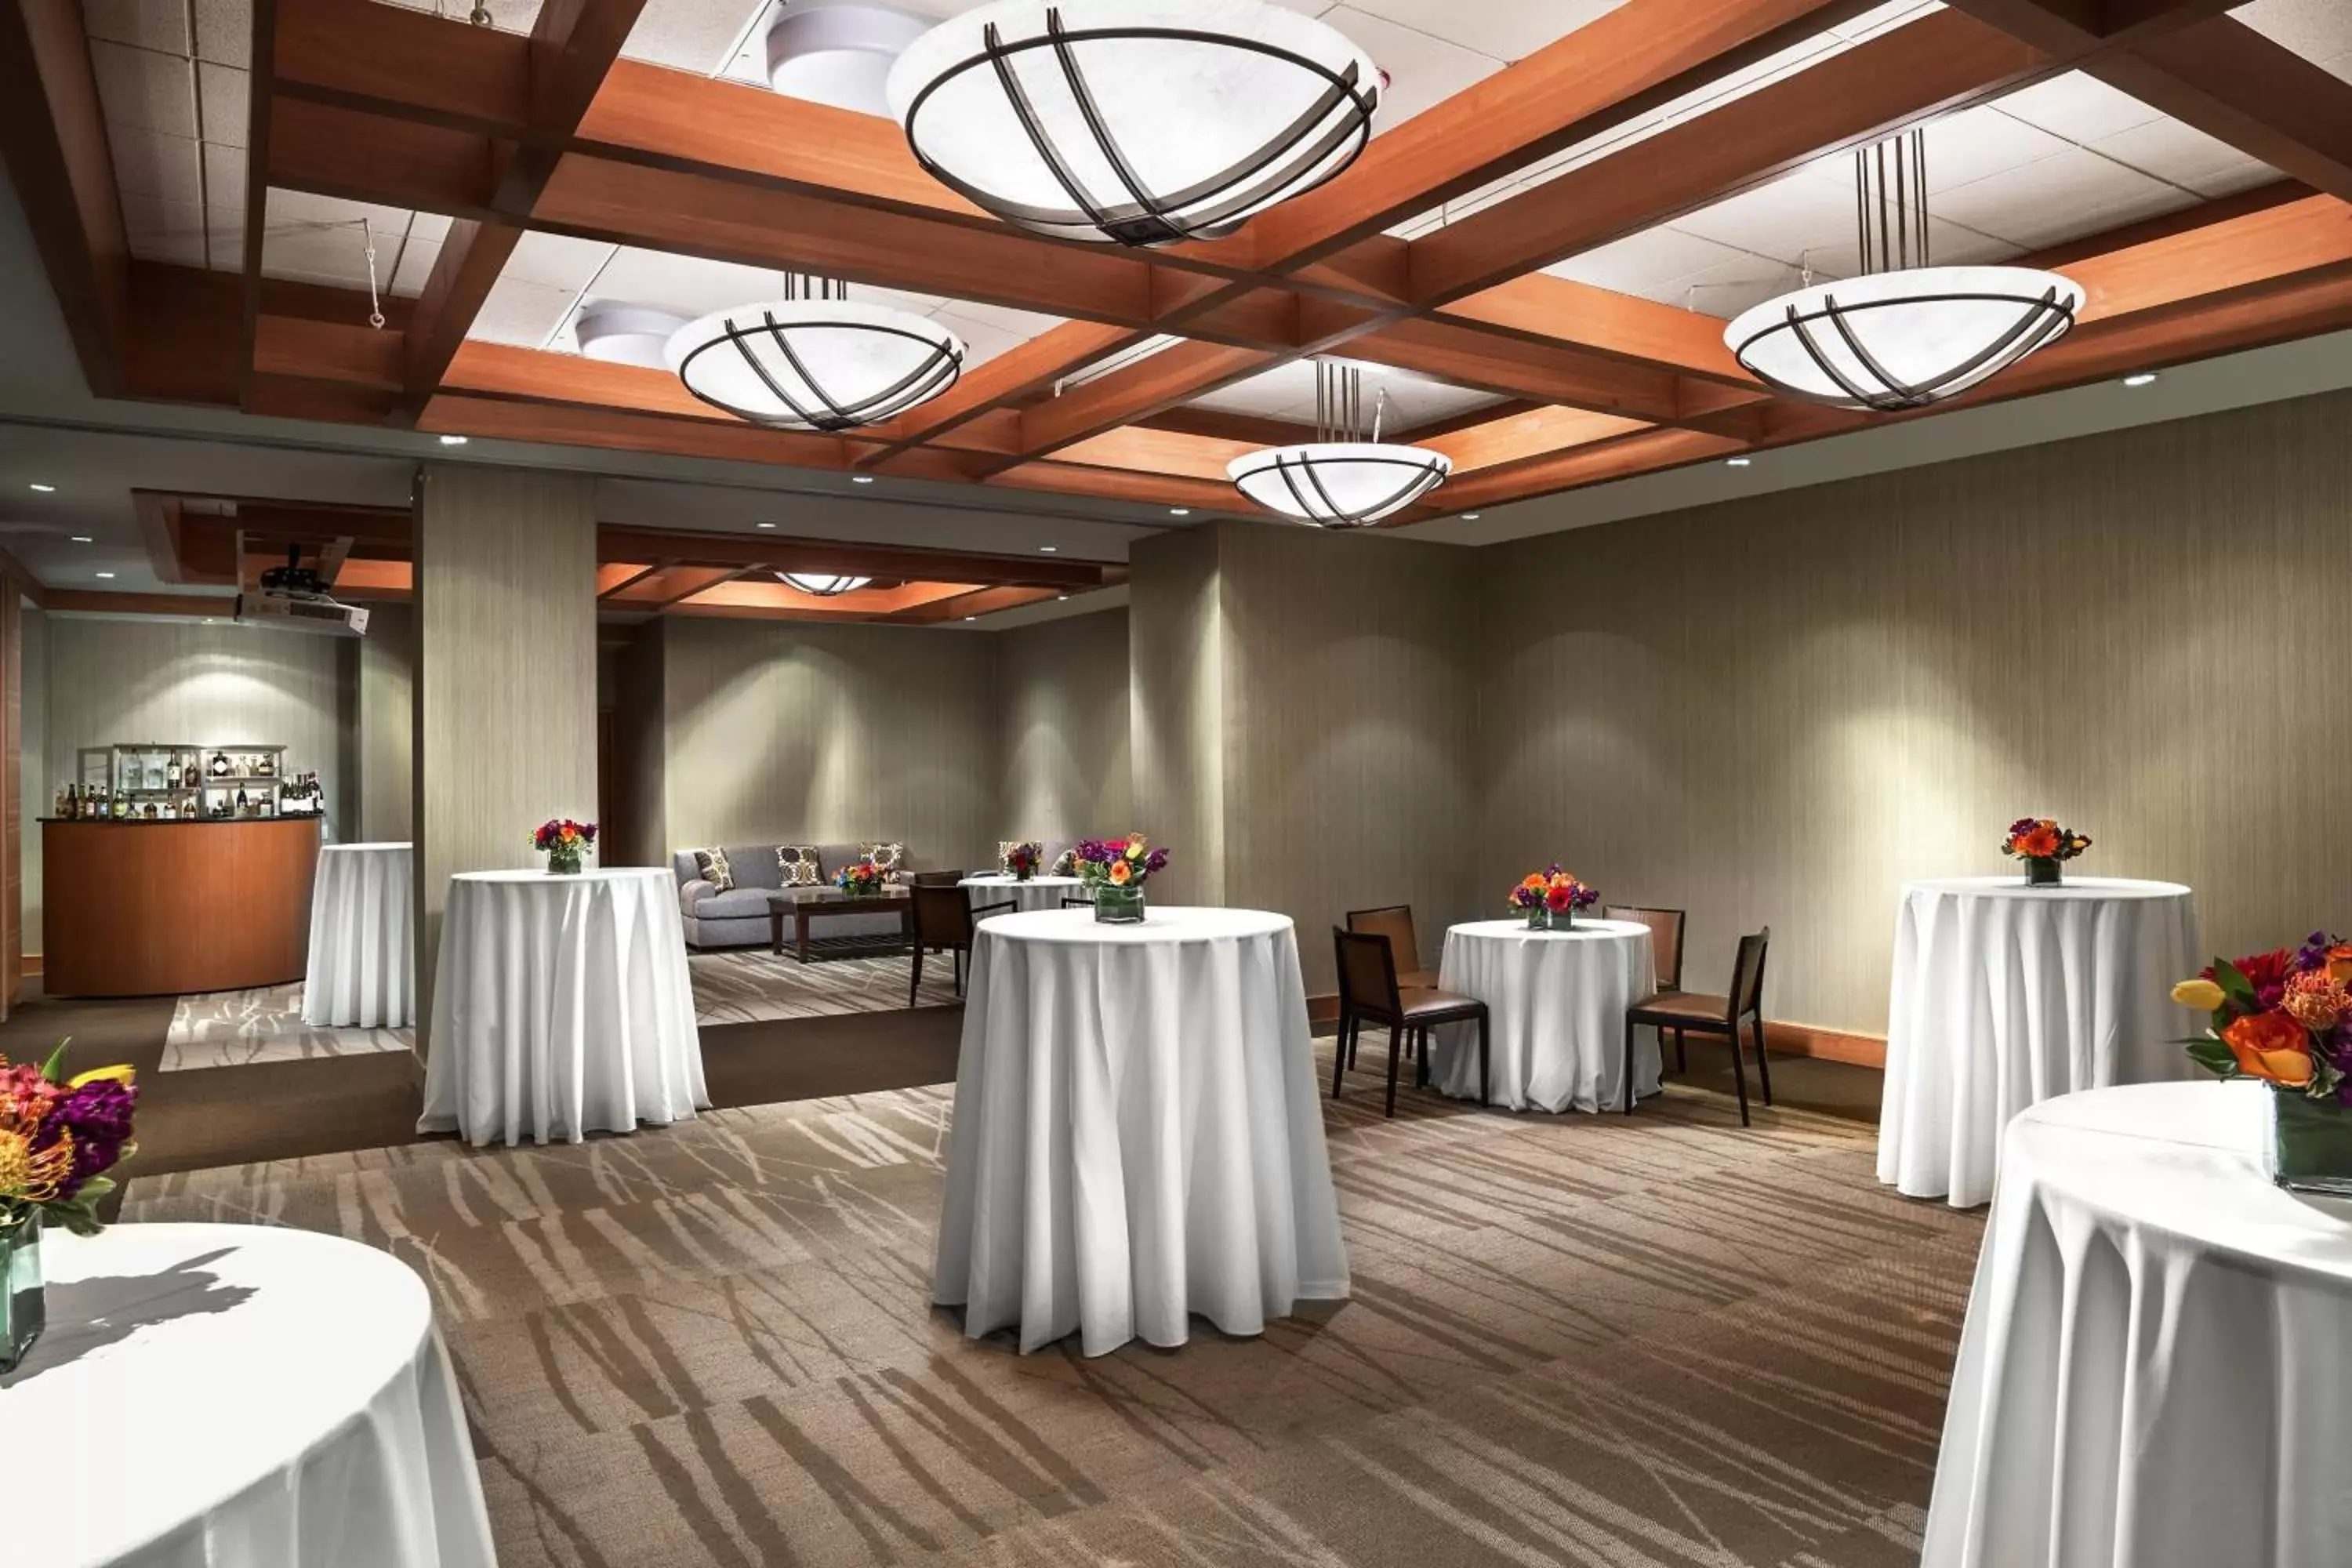 Meeting/conference room, Banquet Facilities in The Westin Monache Resort, Mammoth